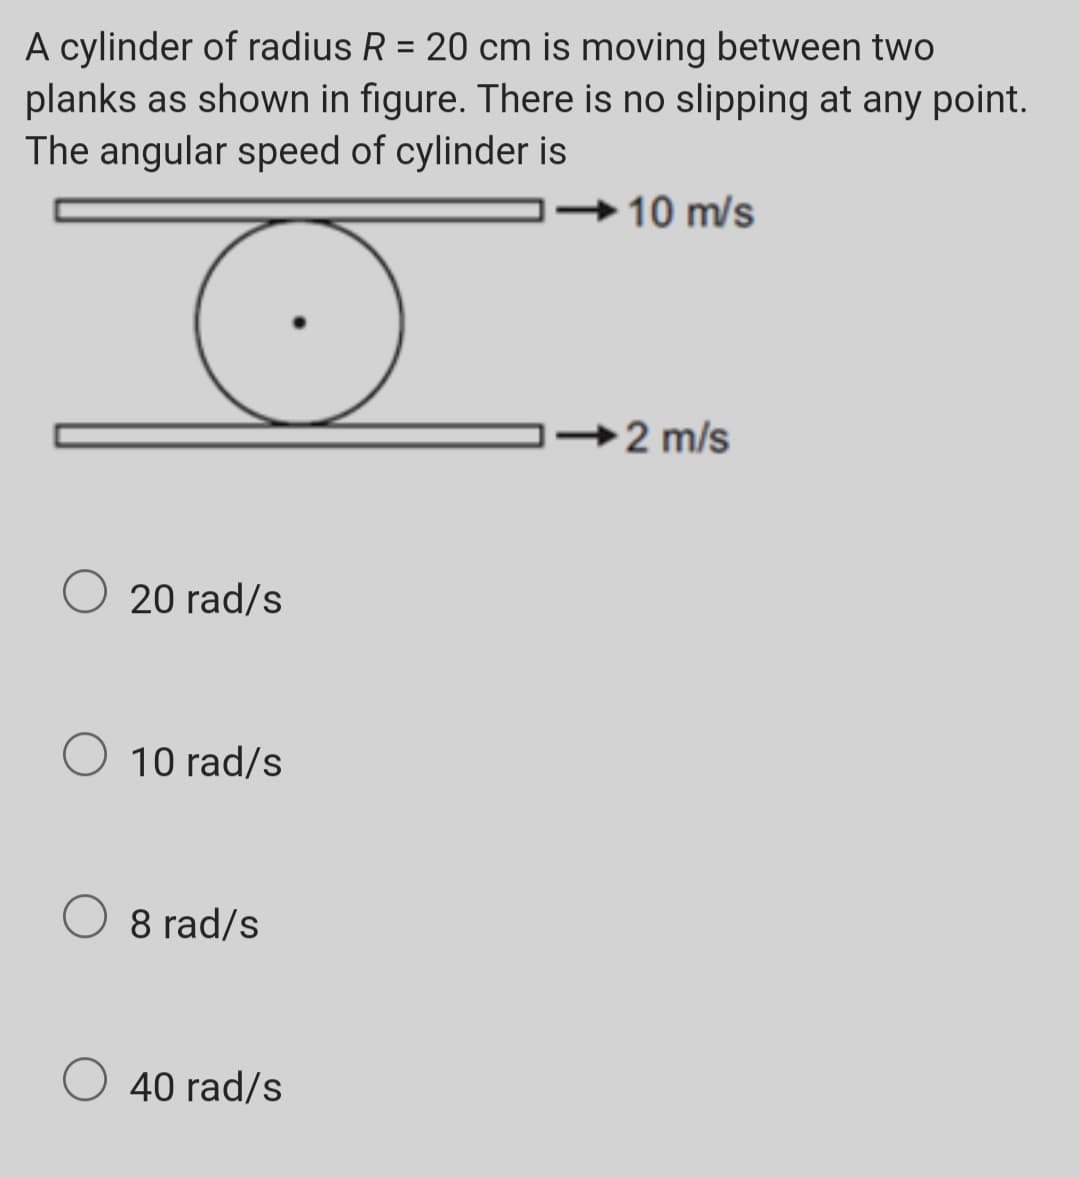 A cylinder of radius R = 20 cm is moving between two
planks as shown in figure. There is no slipping at any point.
The angular speed of cylinder is
→10 m/s
→2 m/s
20 rad/s
O 10 rad/s
O 8 rad/s
O 40 rad/s
